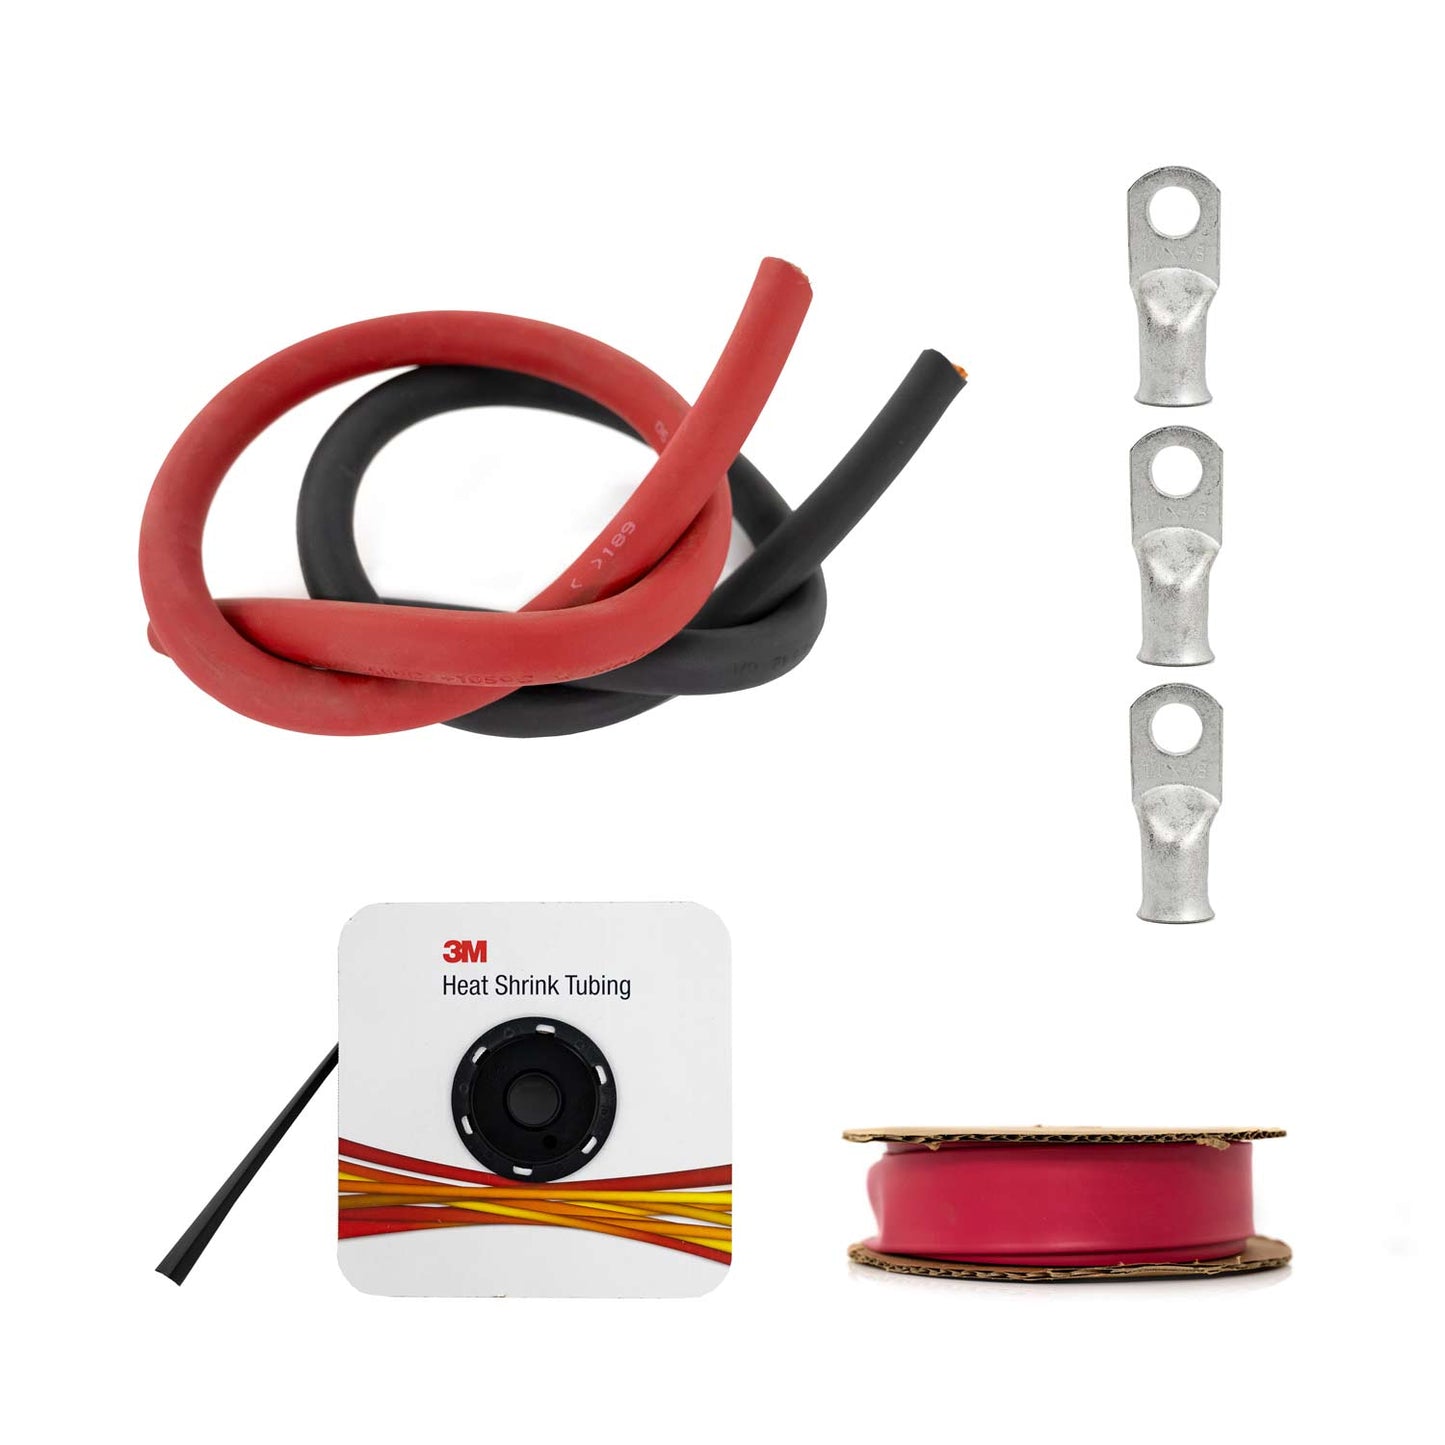 Two Pre-cut Black and Red Cable, One Pre-cut Red Shrink Tubing, One Pre-cut Black Shrink Tubing, Three 3/8" Ring Lugs